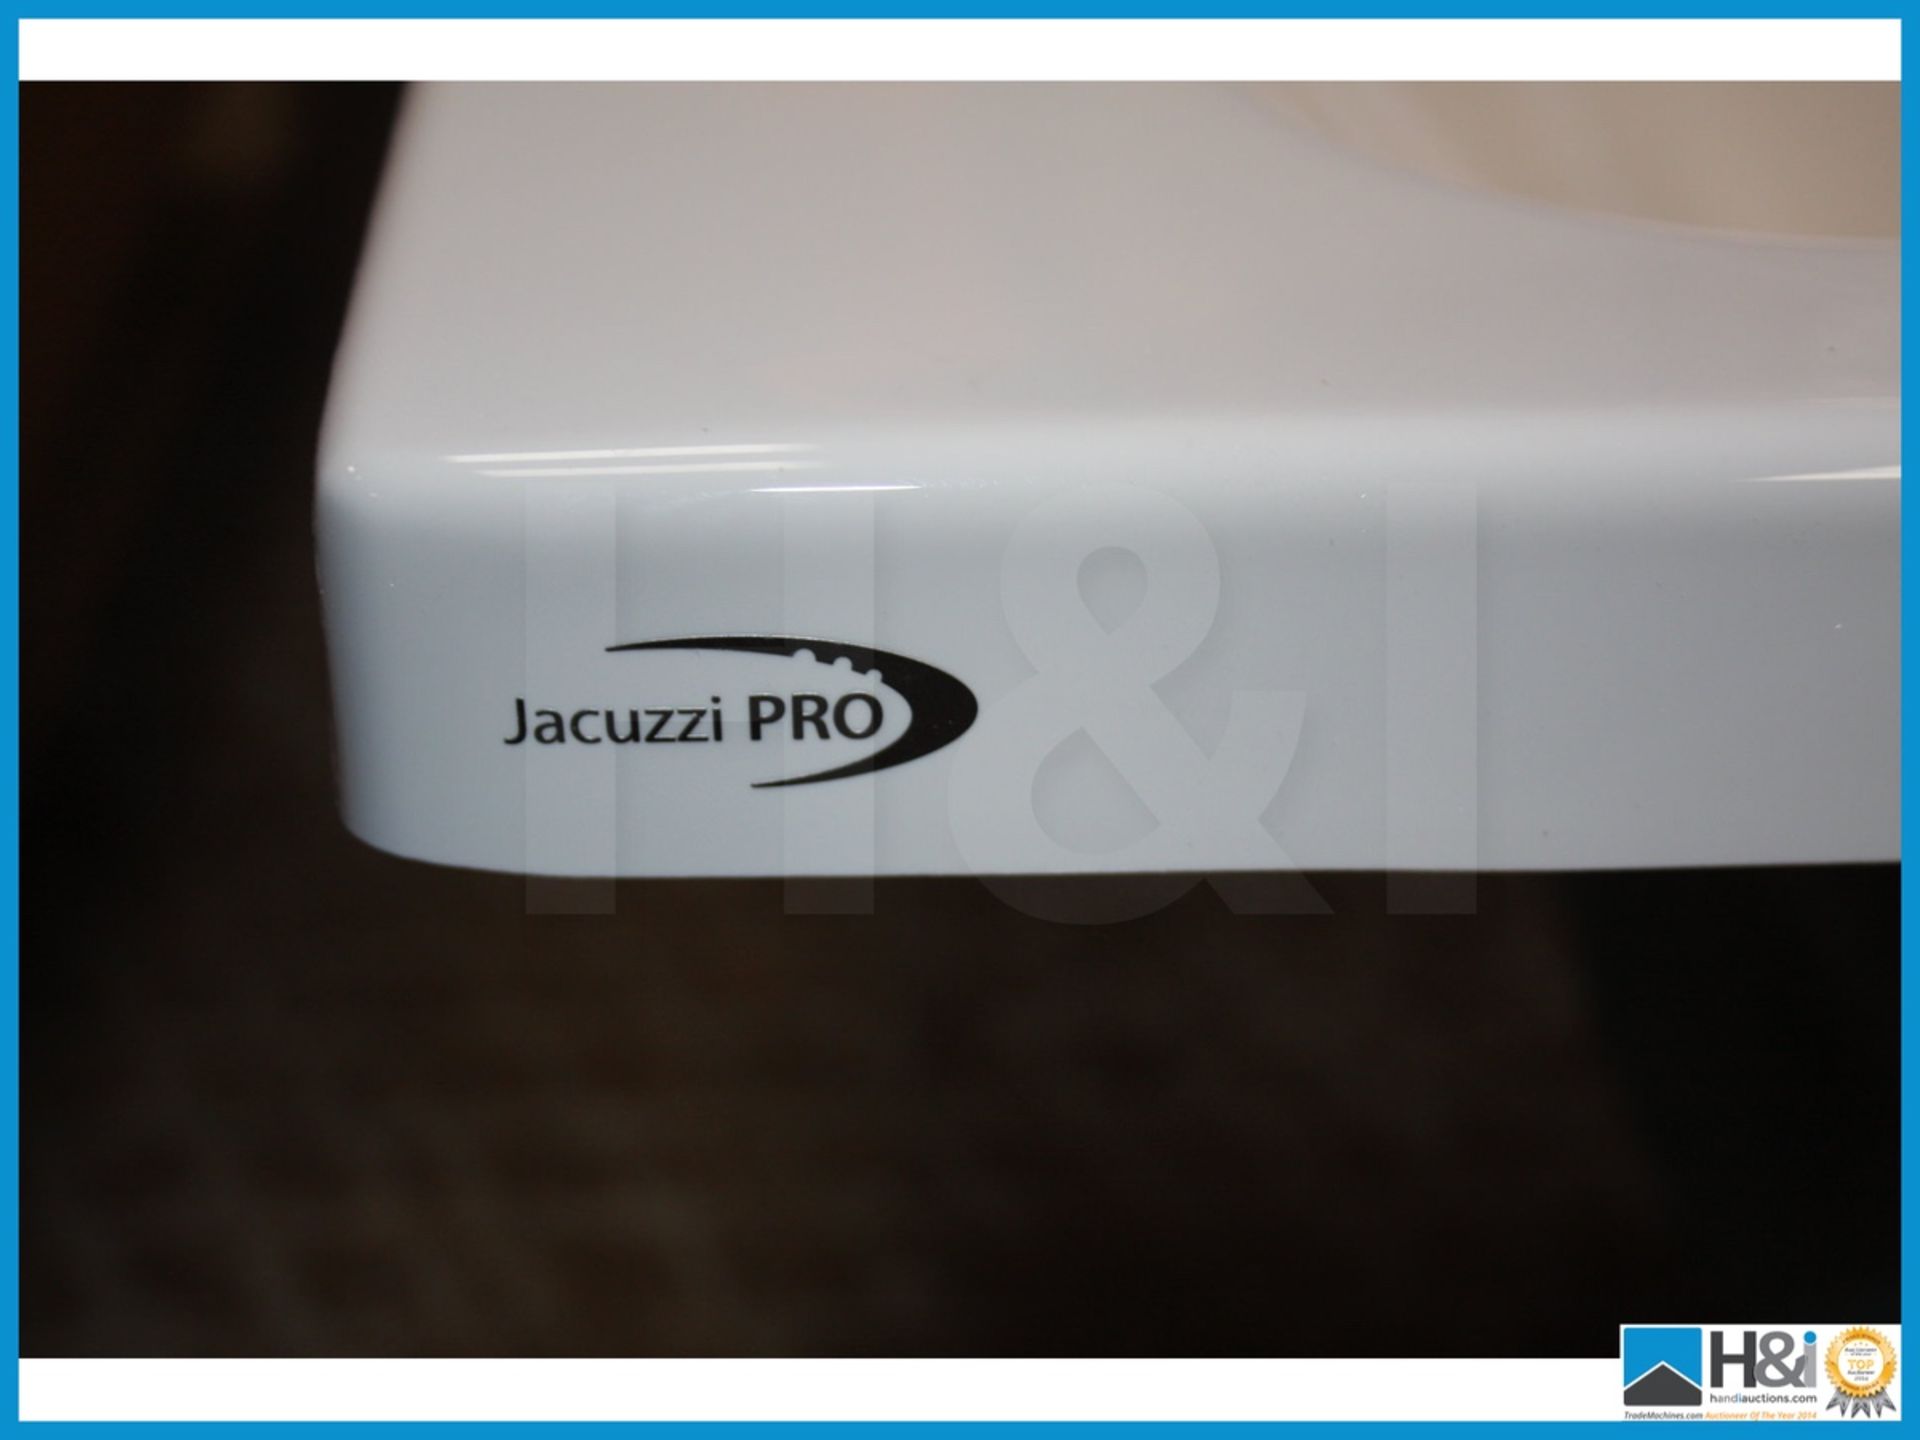 Jacuzzi elatus 1500 x 685 2 tap hole chrome grips new boxed rrp œ899 Appraisal: Viewing Essential - Image 4 of 5